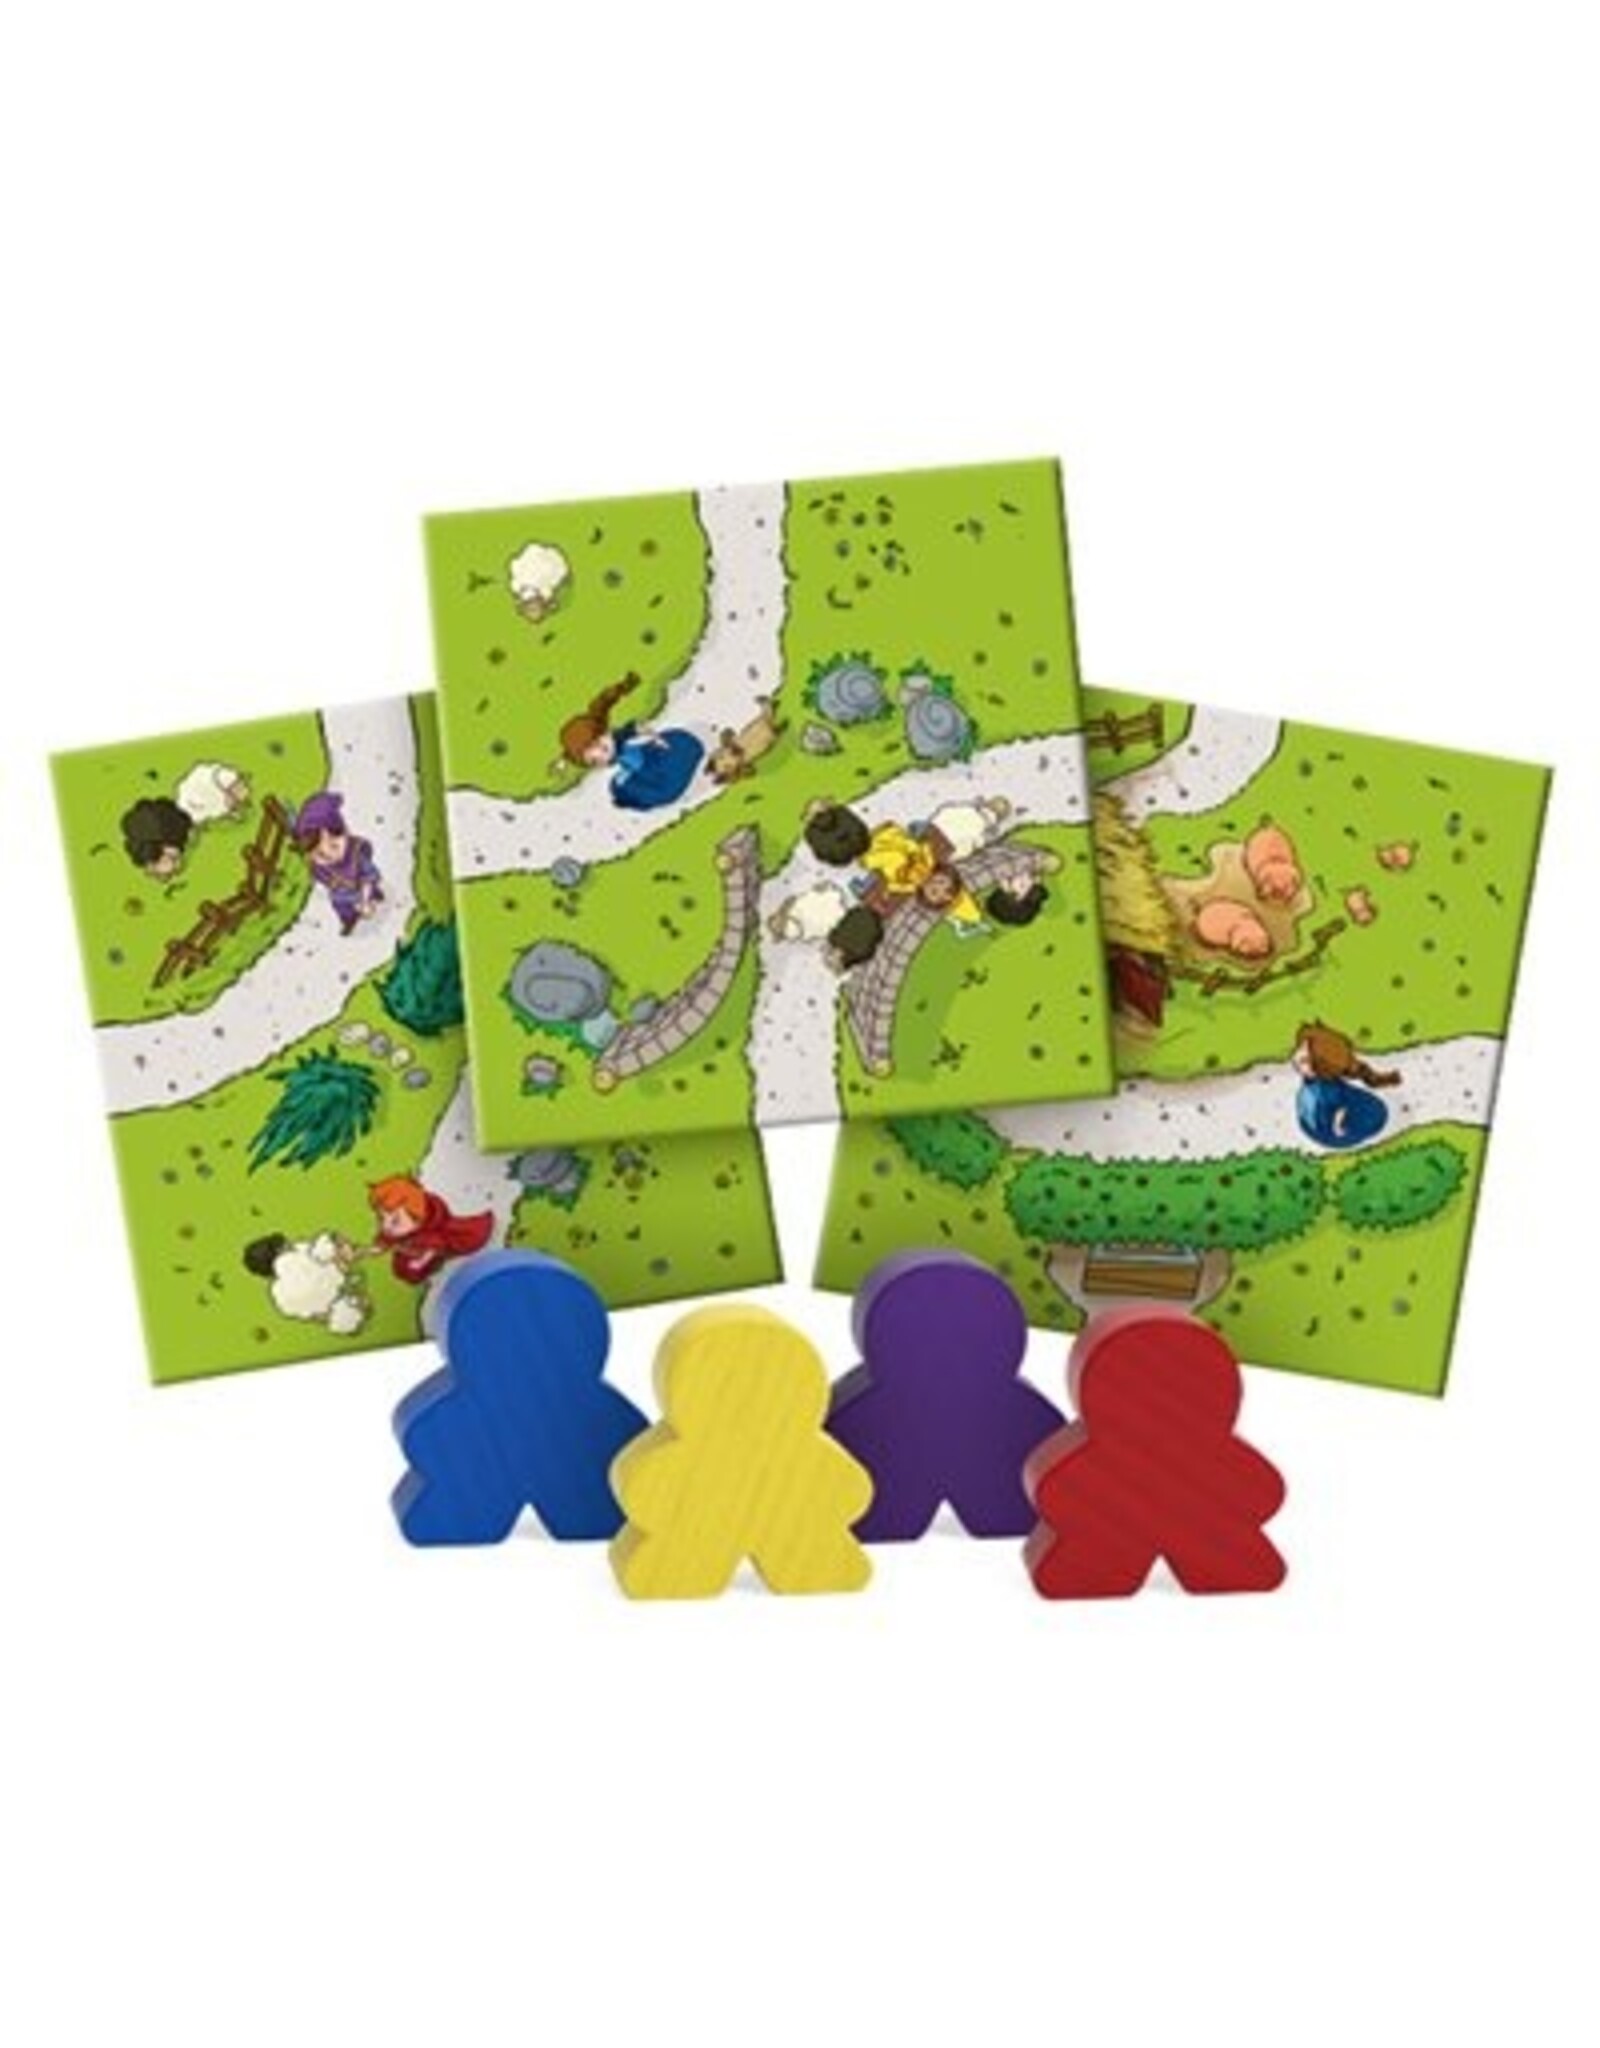 My First Carcassonne